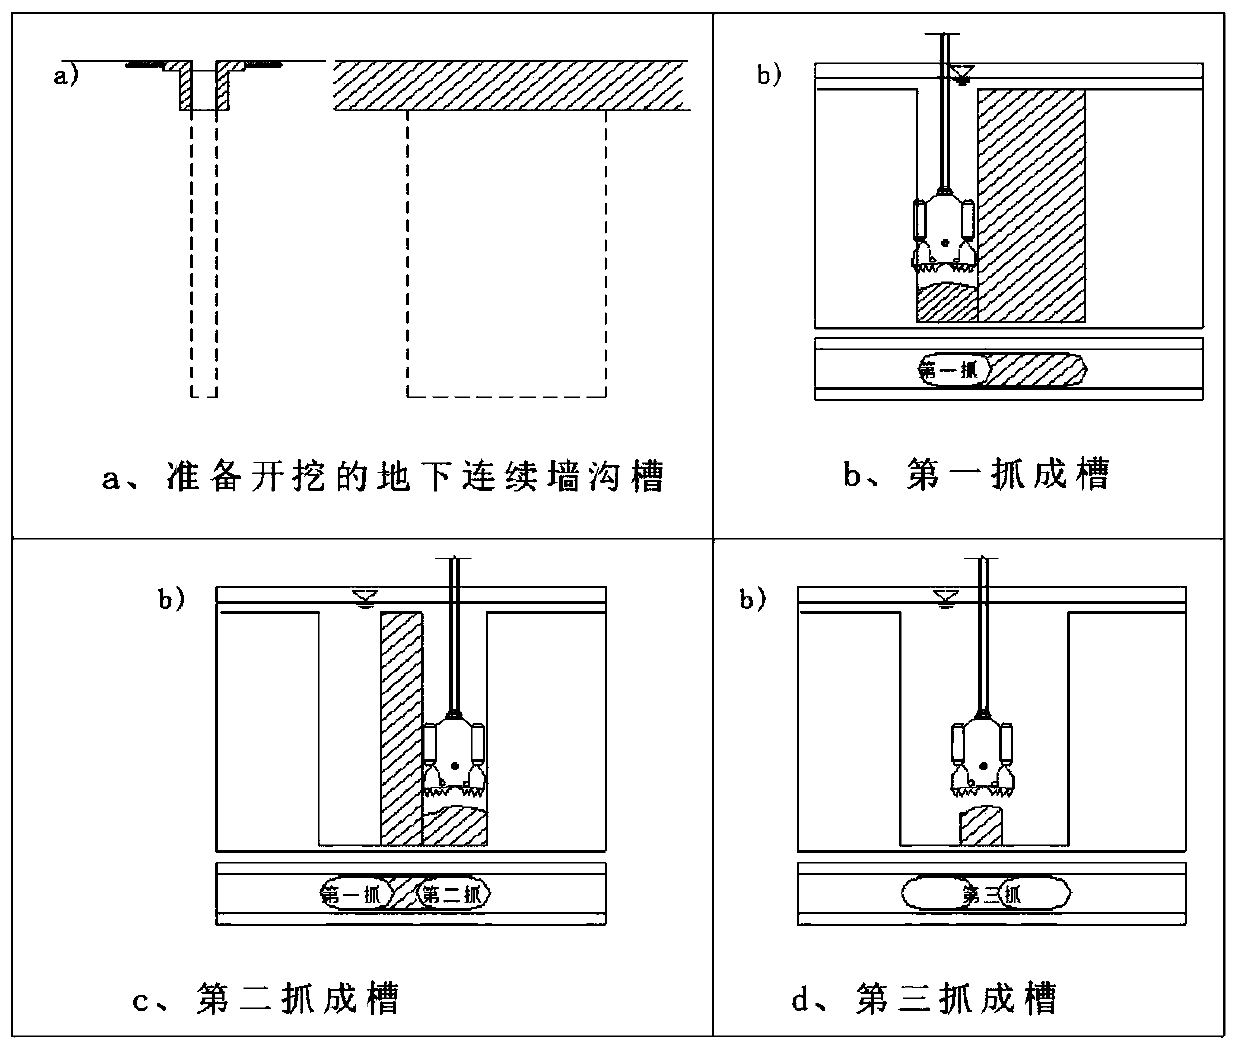 Fast trenching construction method for underground continuous wall in weakly weathered rock